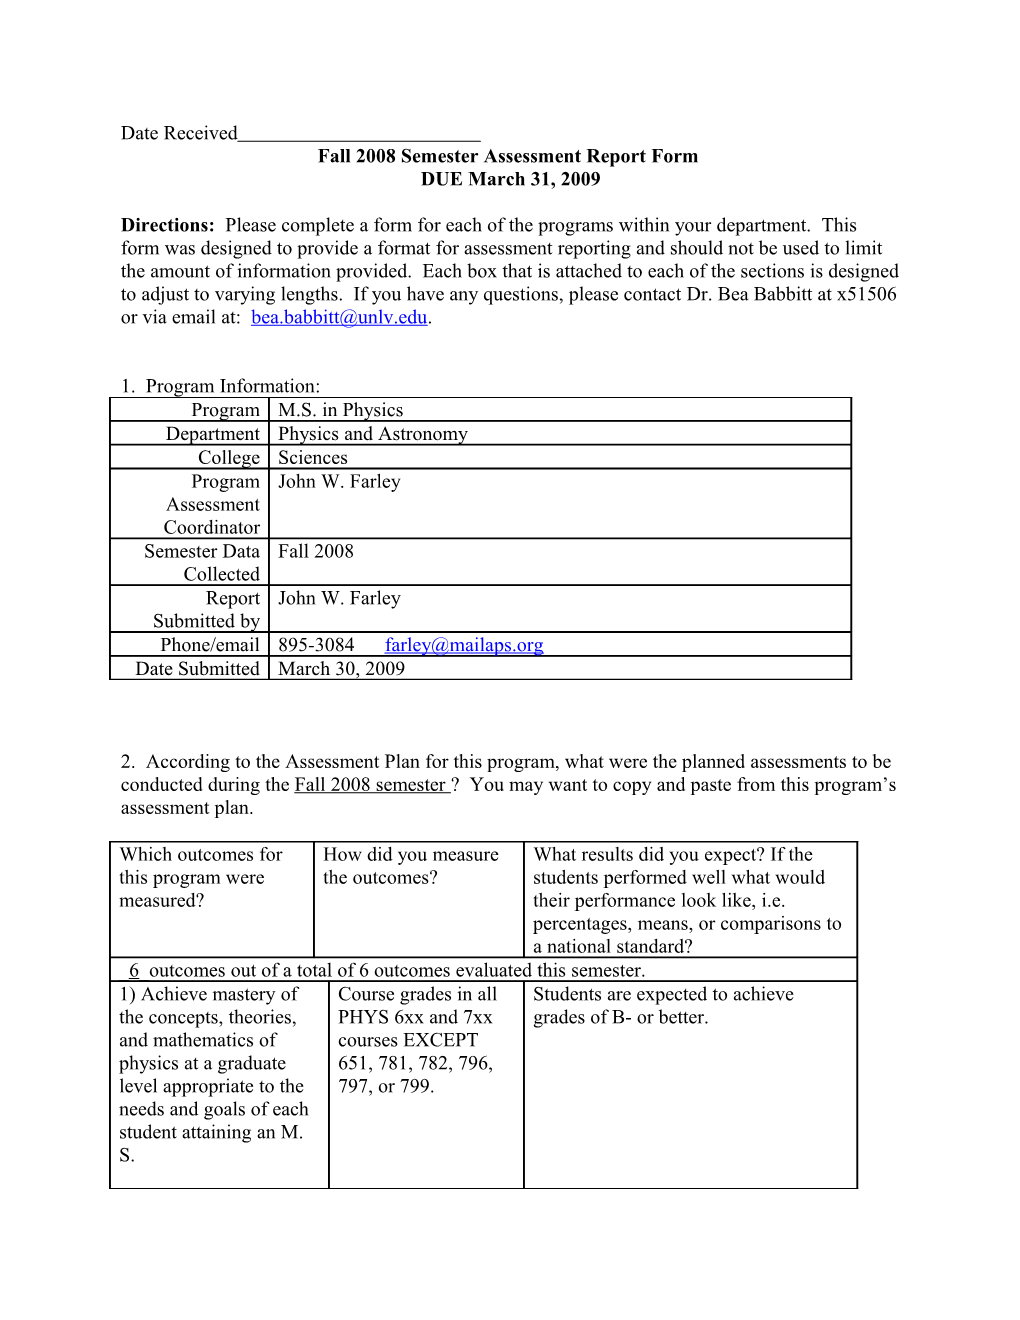 Annual Assessment Report Form for Student Learning Outcomes Ass